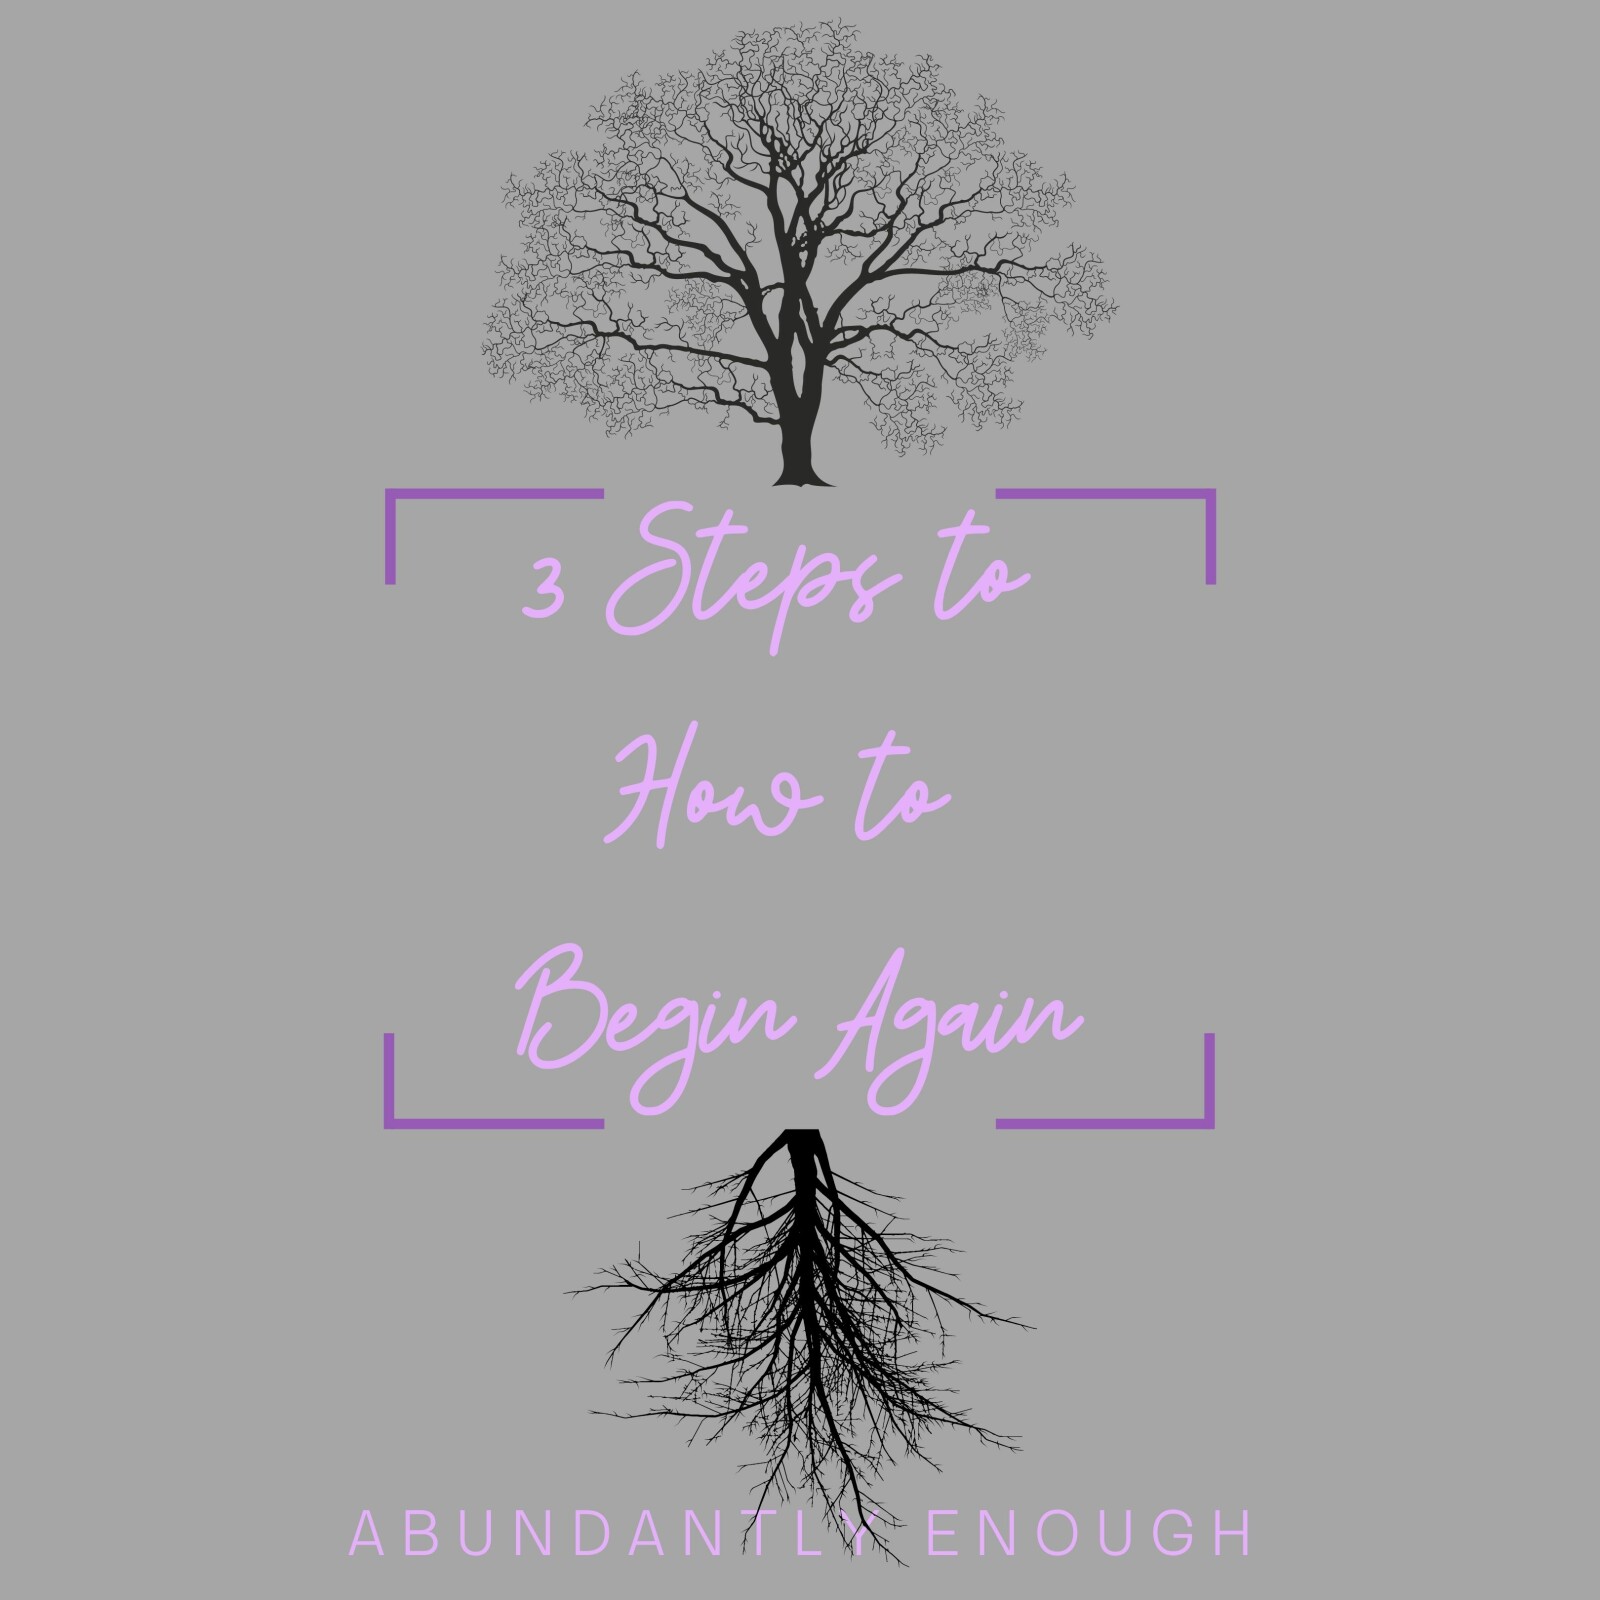 How to Begin Again.  Part 2 - Dreaming